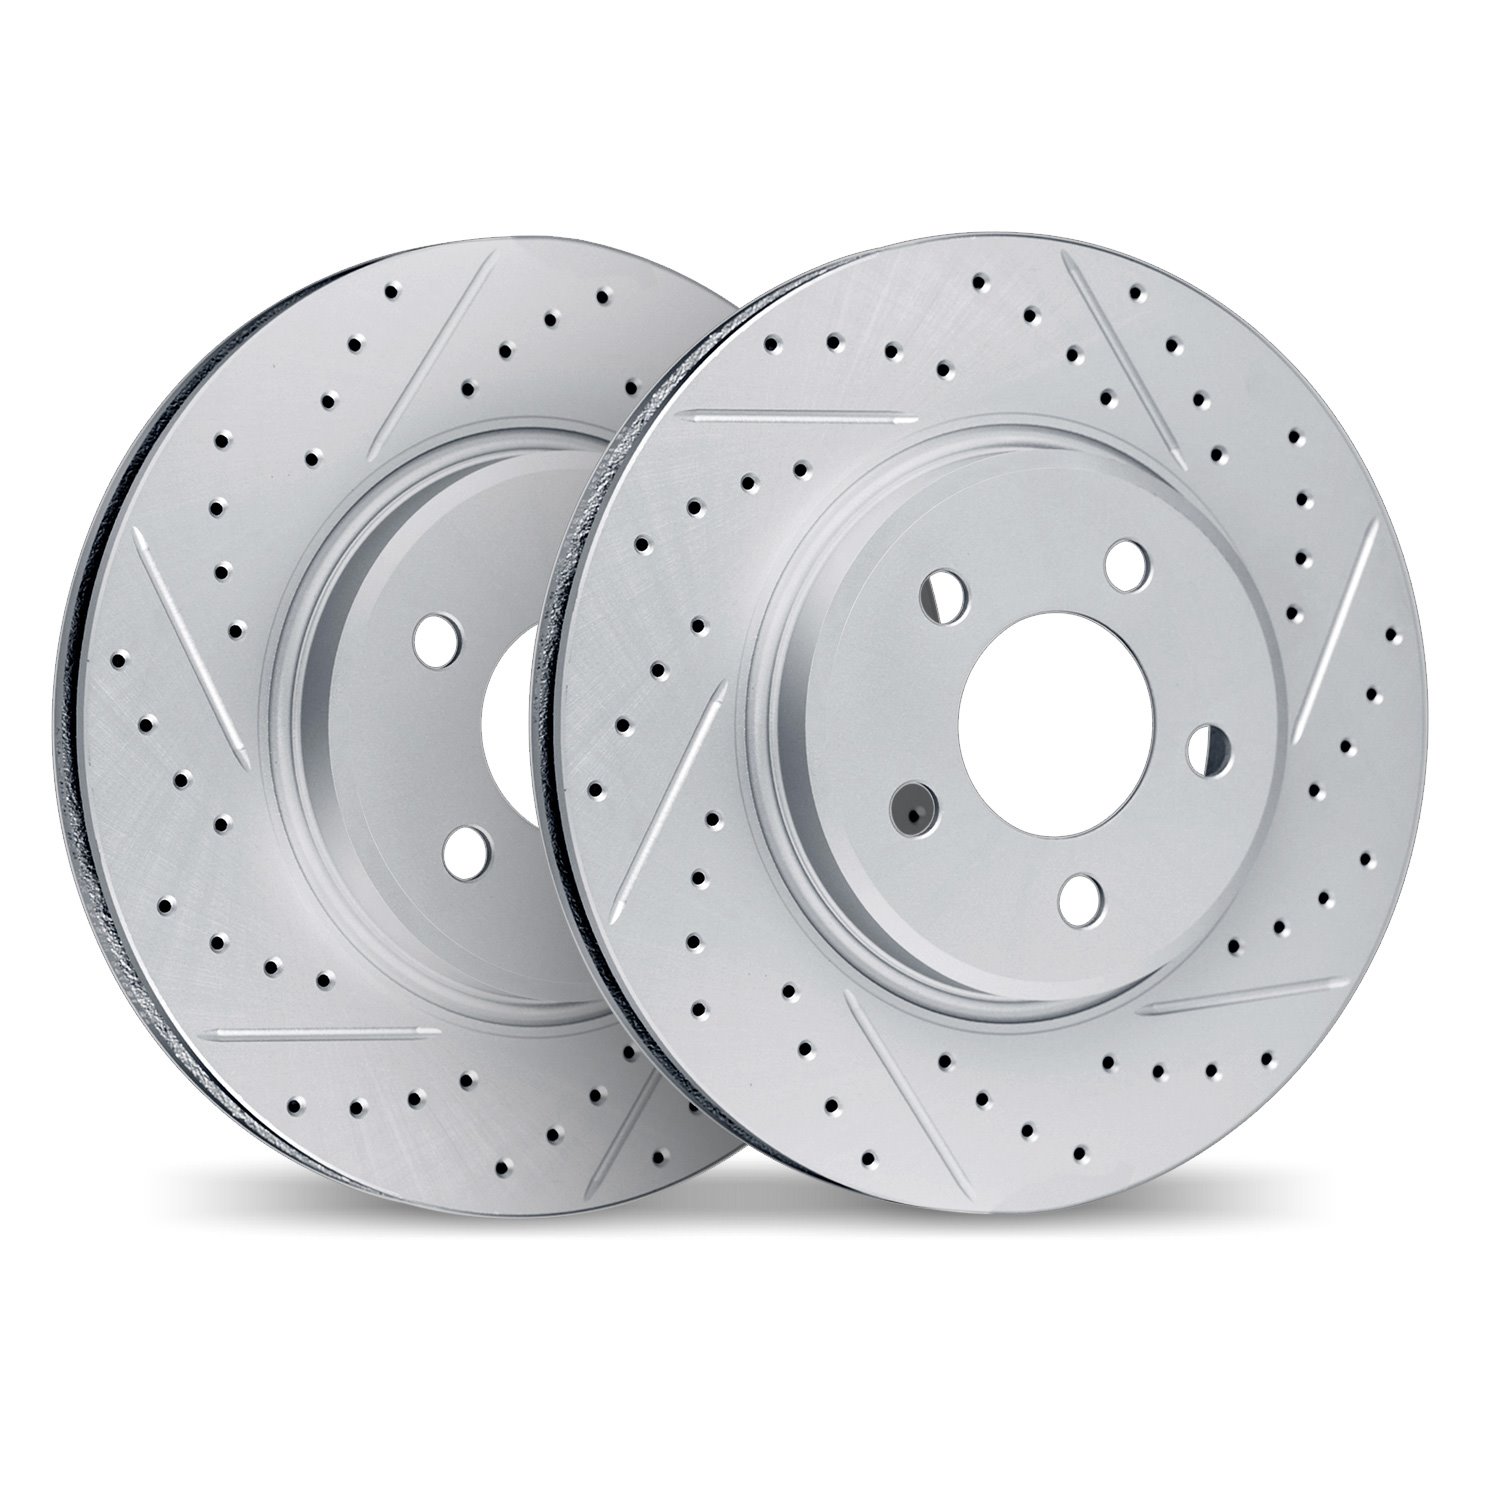 2002-46010 Geoperformance Drilled/Slotted Brake Rotors, 2003-2007 GM, Position: Front